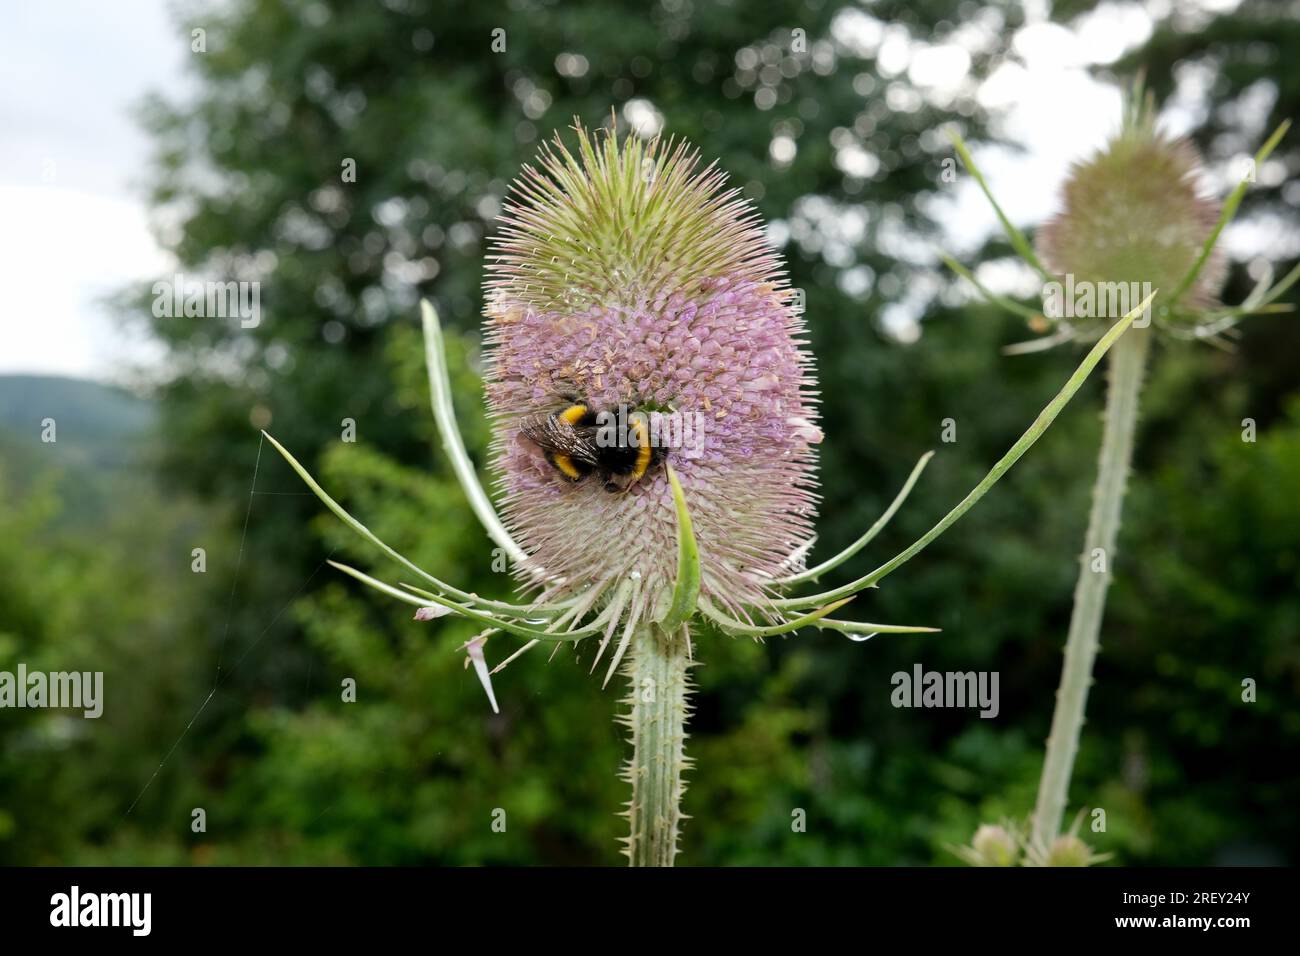 Wild teasel Dipsacus fullonum with bee collecting pollen. Stock Photo